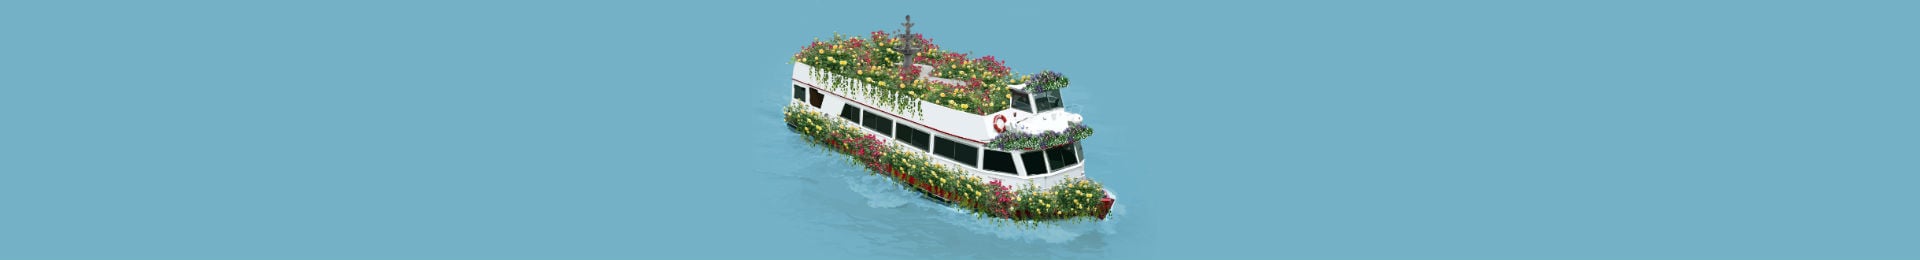 Floating Gardens of Westminster tickets